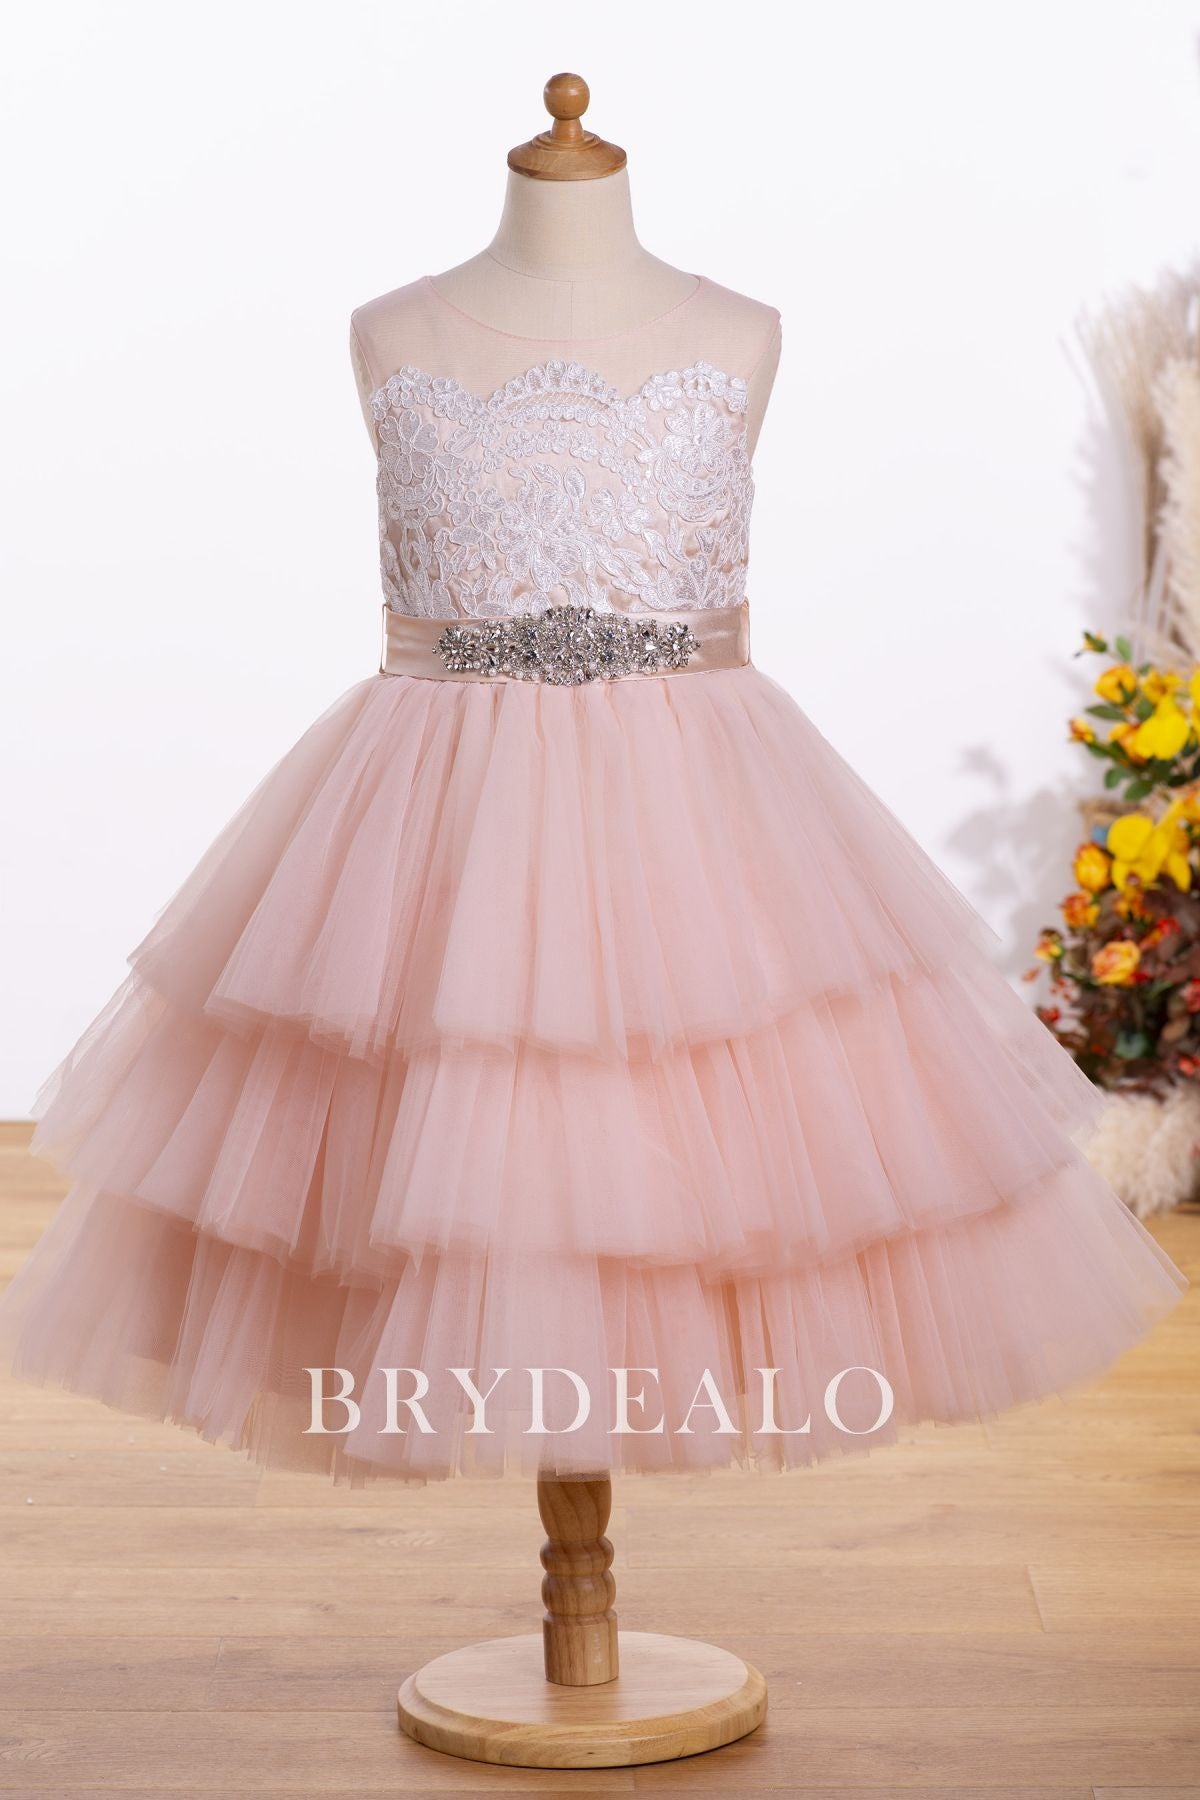 Lace Pink Knee Length Tiered Flower Girl Dress For Wedding